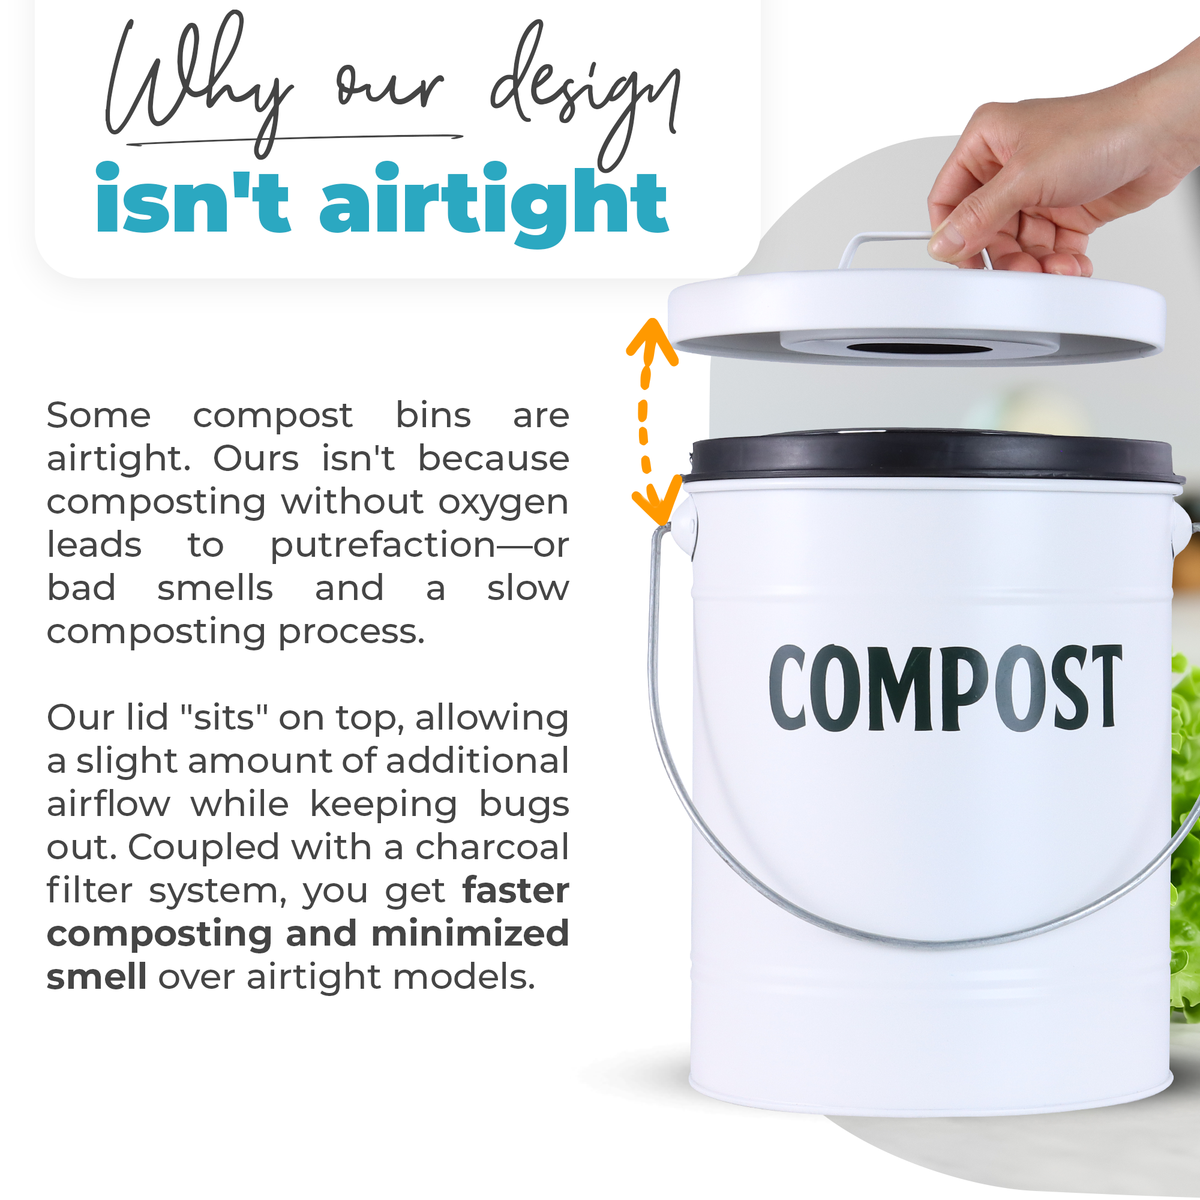 Why we designed our compost bin not to be airtight for faster composting and minimized smell